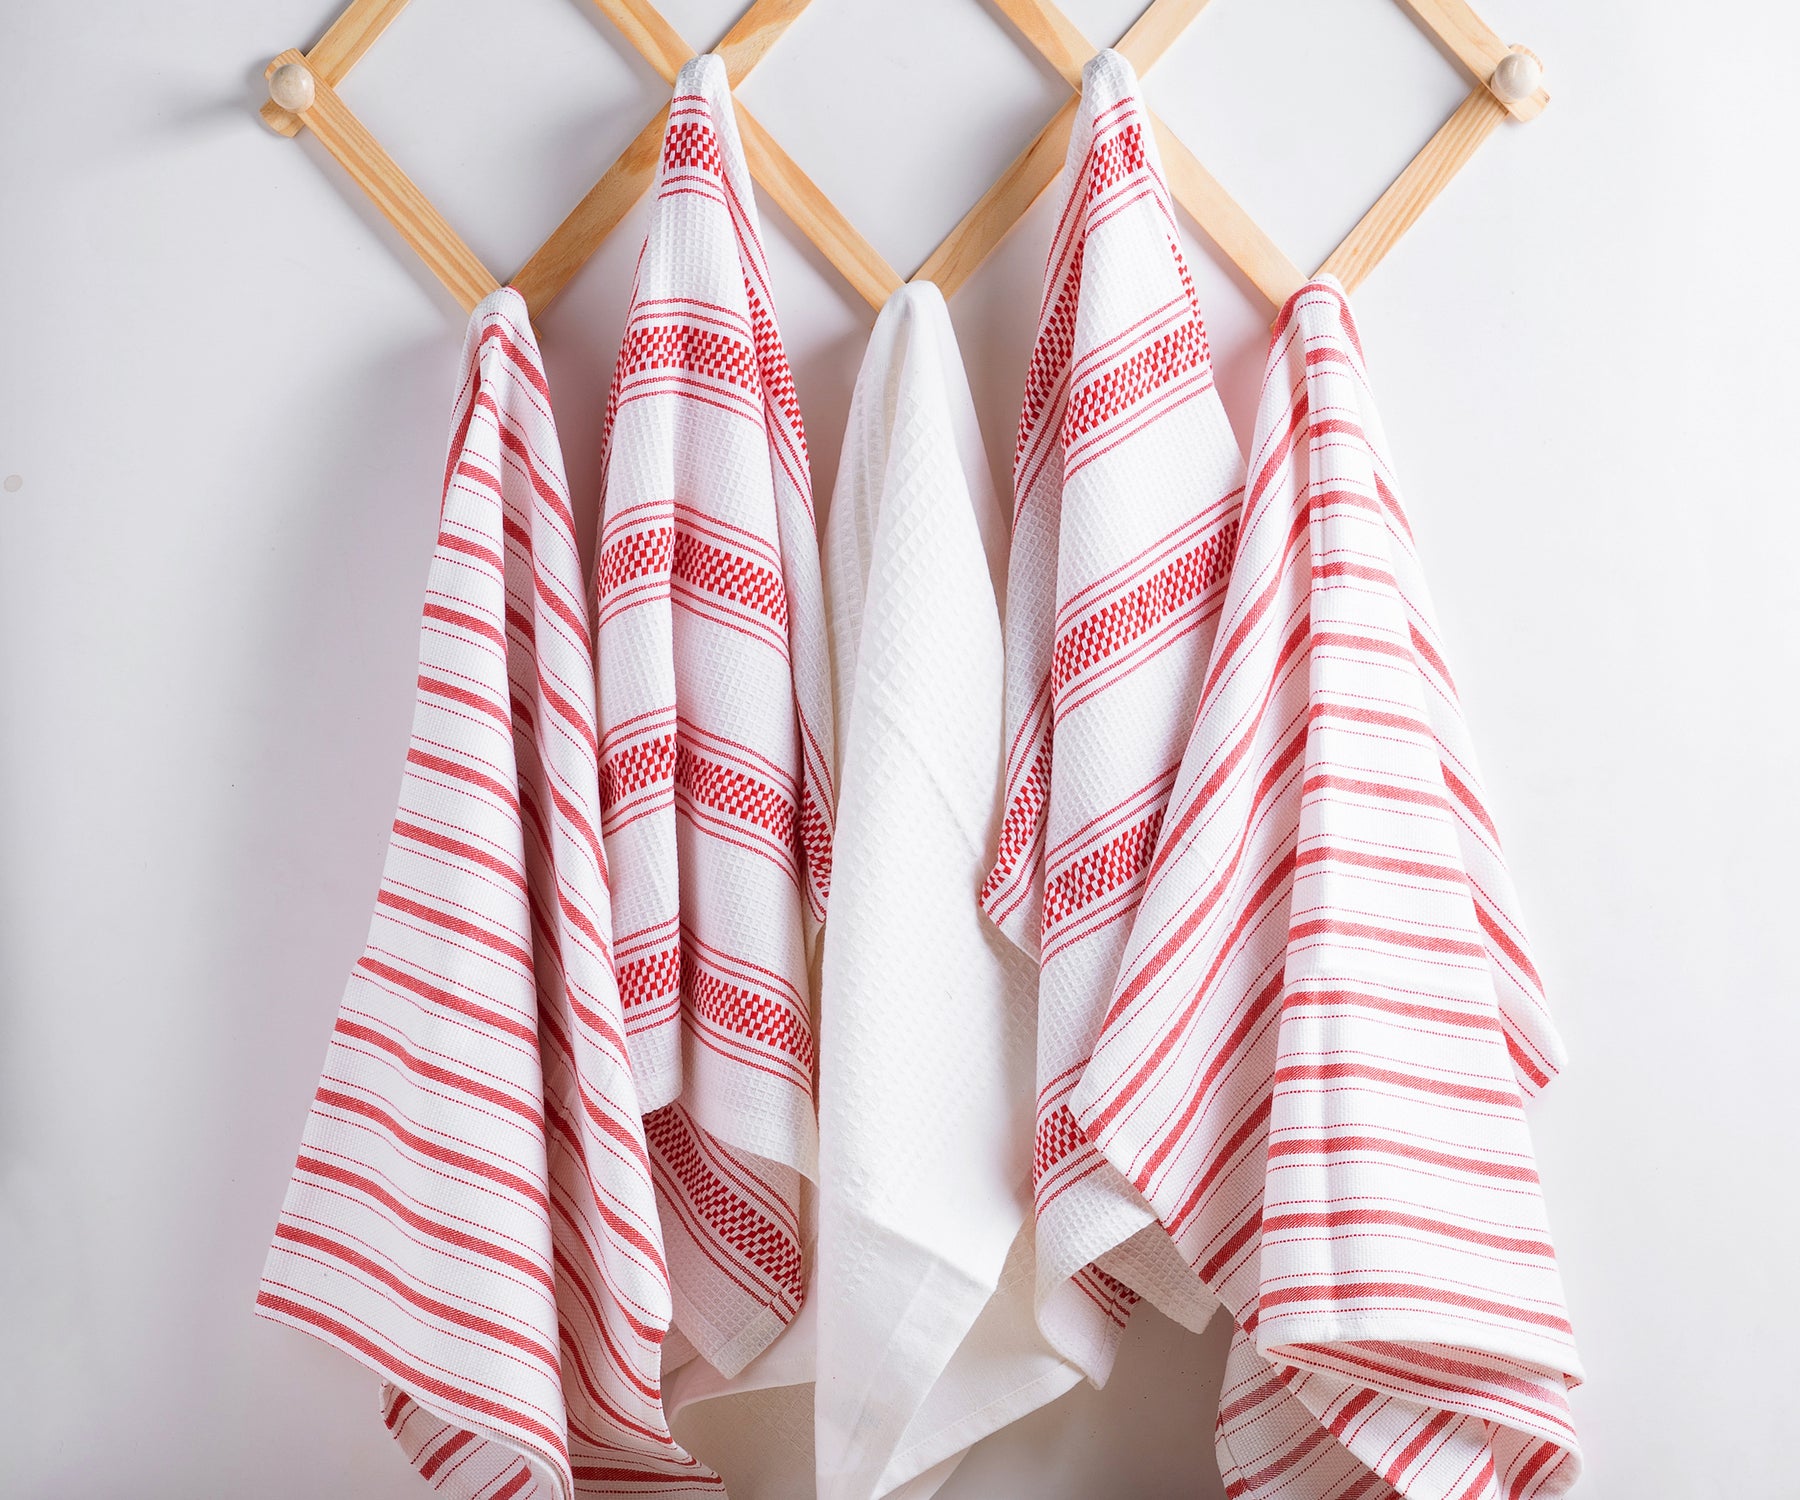 kitchen towels set of 6, Red and white striped dish towels cotton, drying dish towels for kitchen.